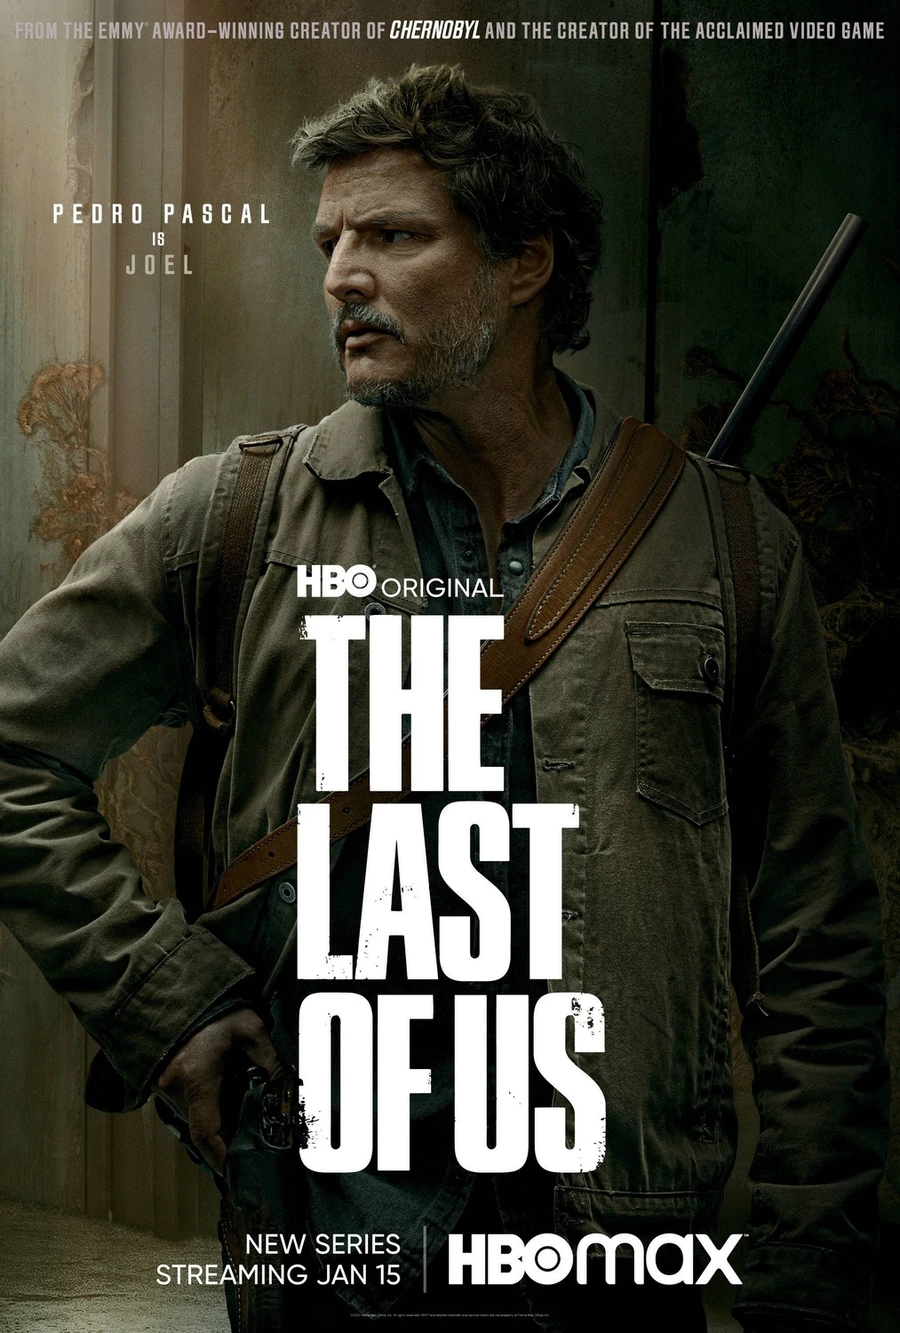 5595 meet the characters of the tv adaptation of the video game the last of us which will premier